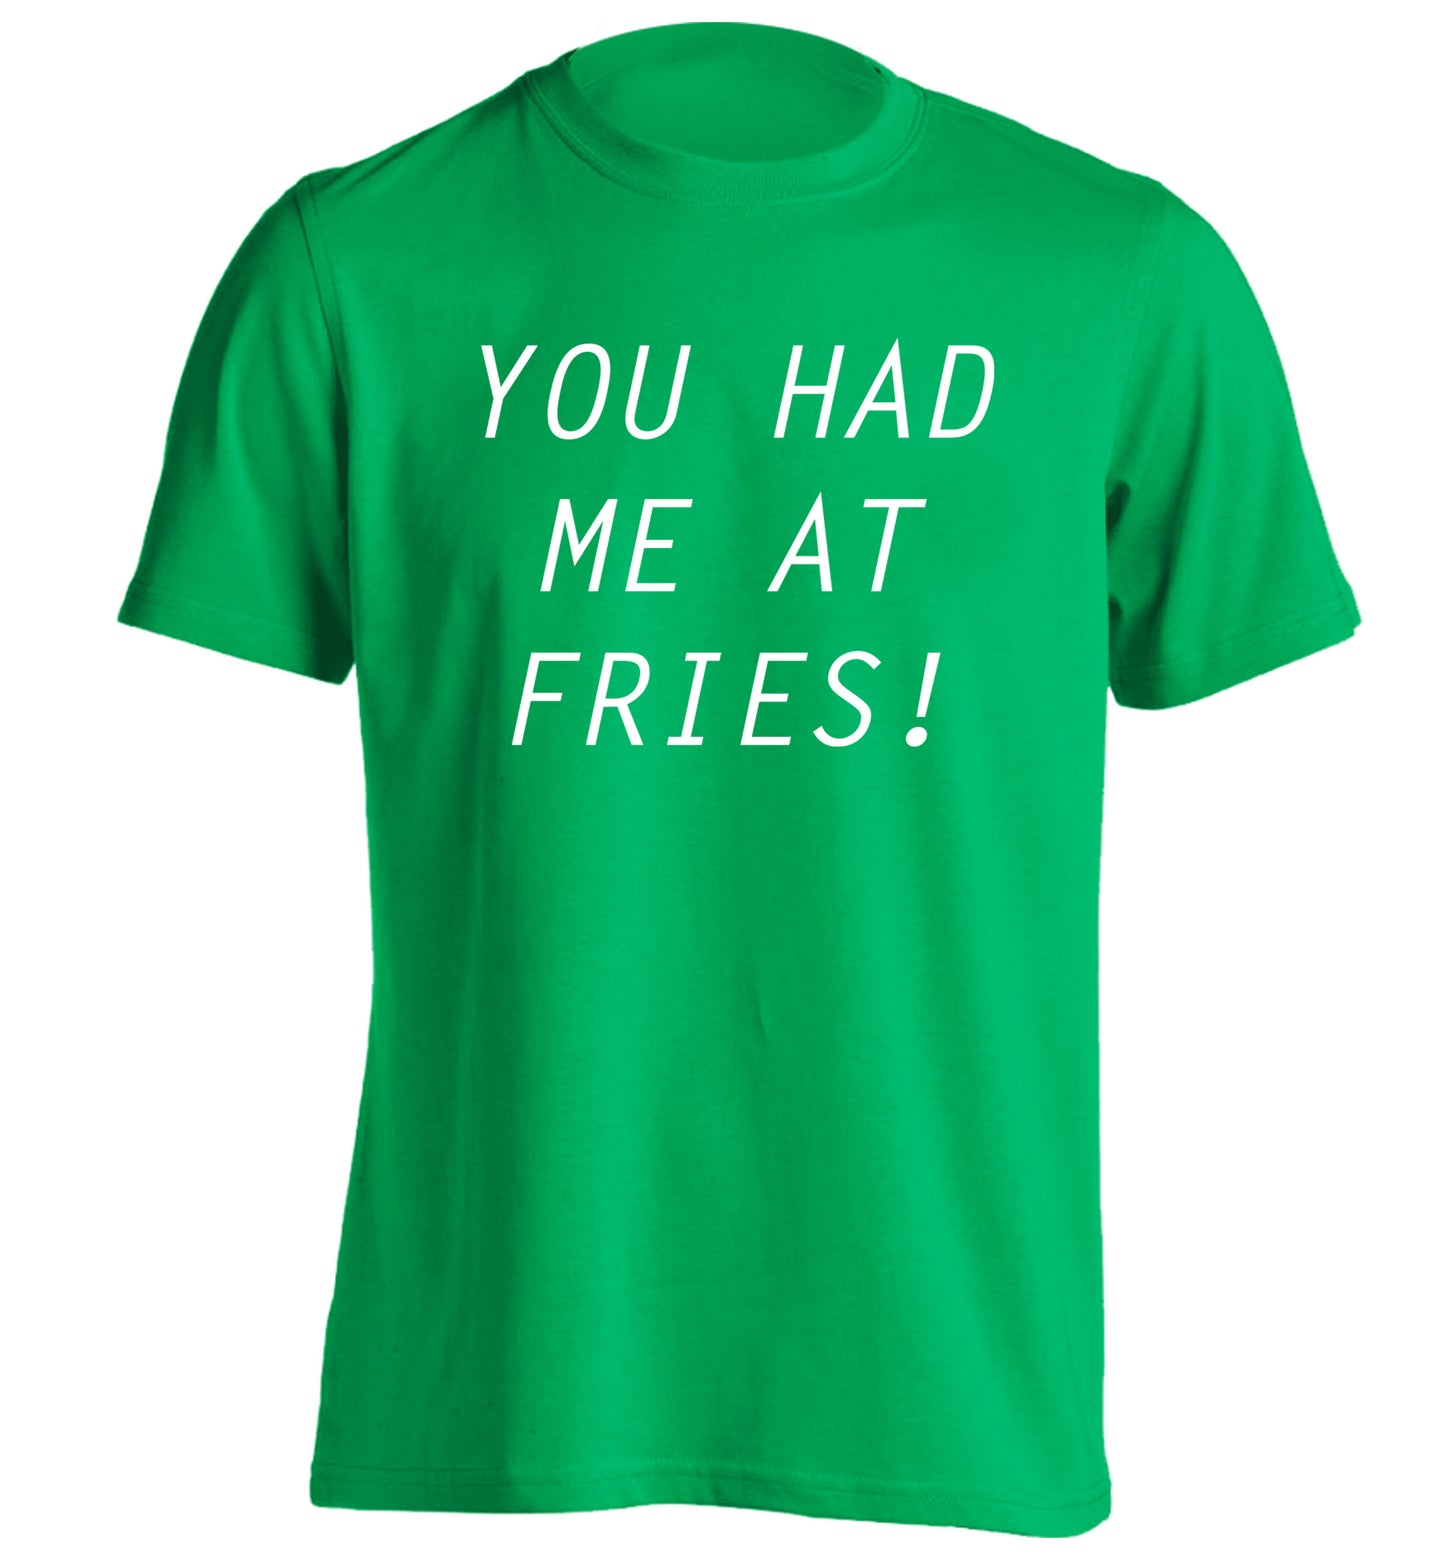 You had me at fries adults unisex green Tshirt 2XL